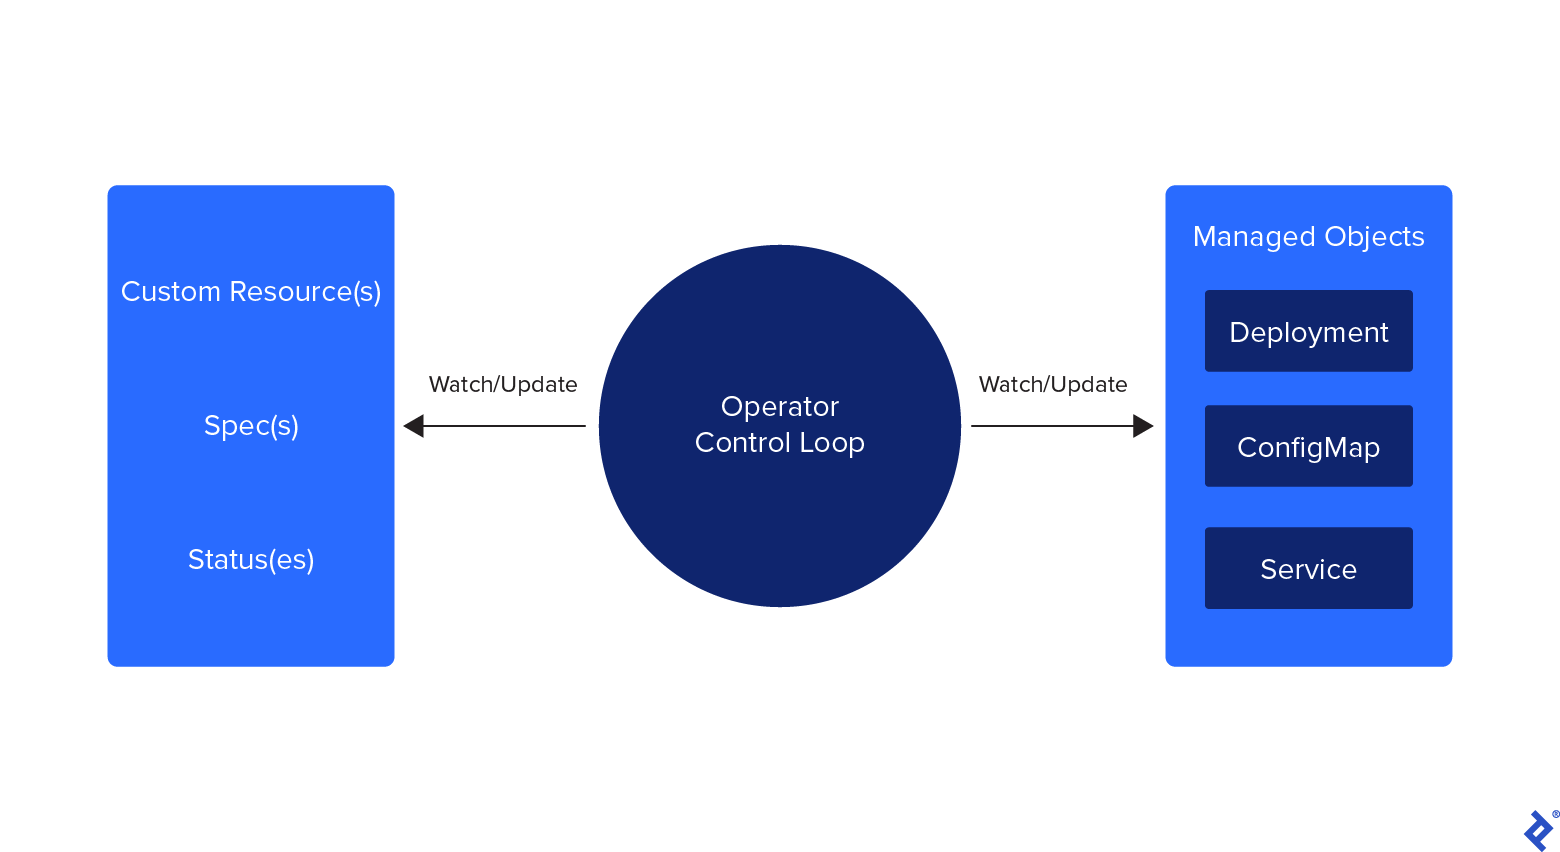 A diagram centered around an Operator Control Loop. On the left is a blue box containing Custom Resource(s), Spec(s), and Status(es). In the middle of the diagram, in a blue circle, an arrow labeled Watch/Update extends from the operator control loop to the left box. On the right is a blue box of managed objects: Deployment, ConfigMap, and Service. An arrow labeled Watch/Update extends from the operator control loop to these managed objects.